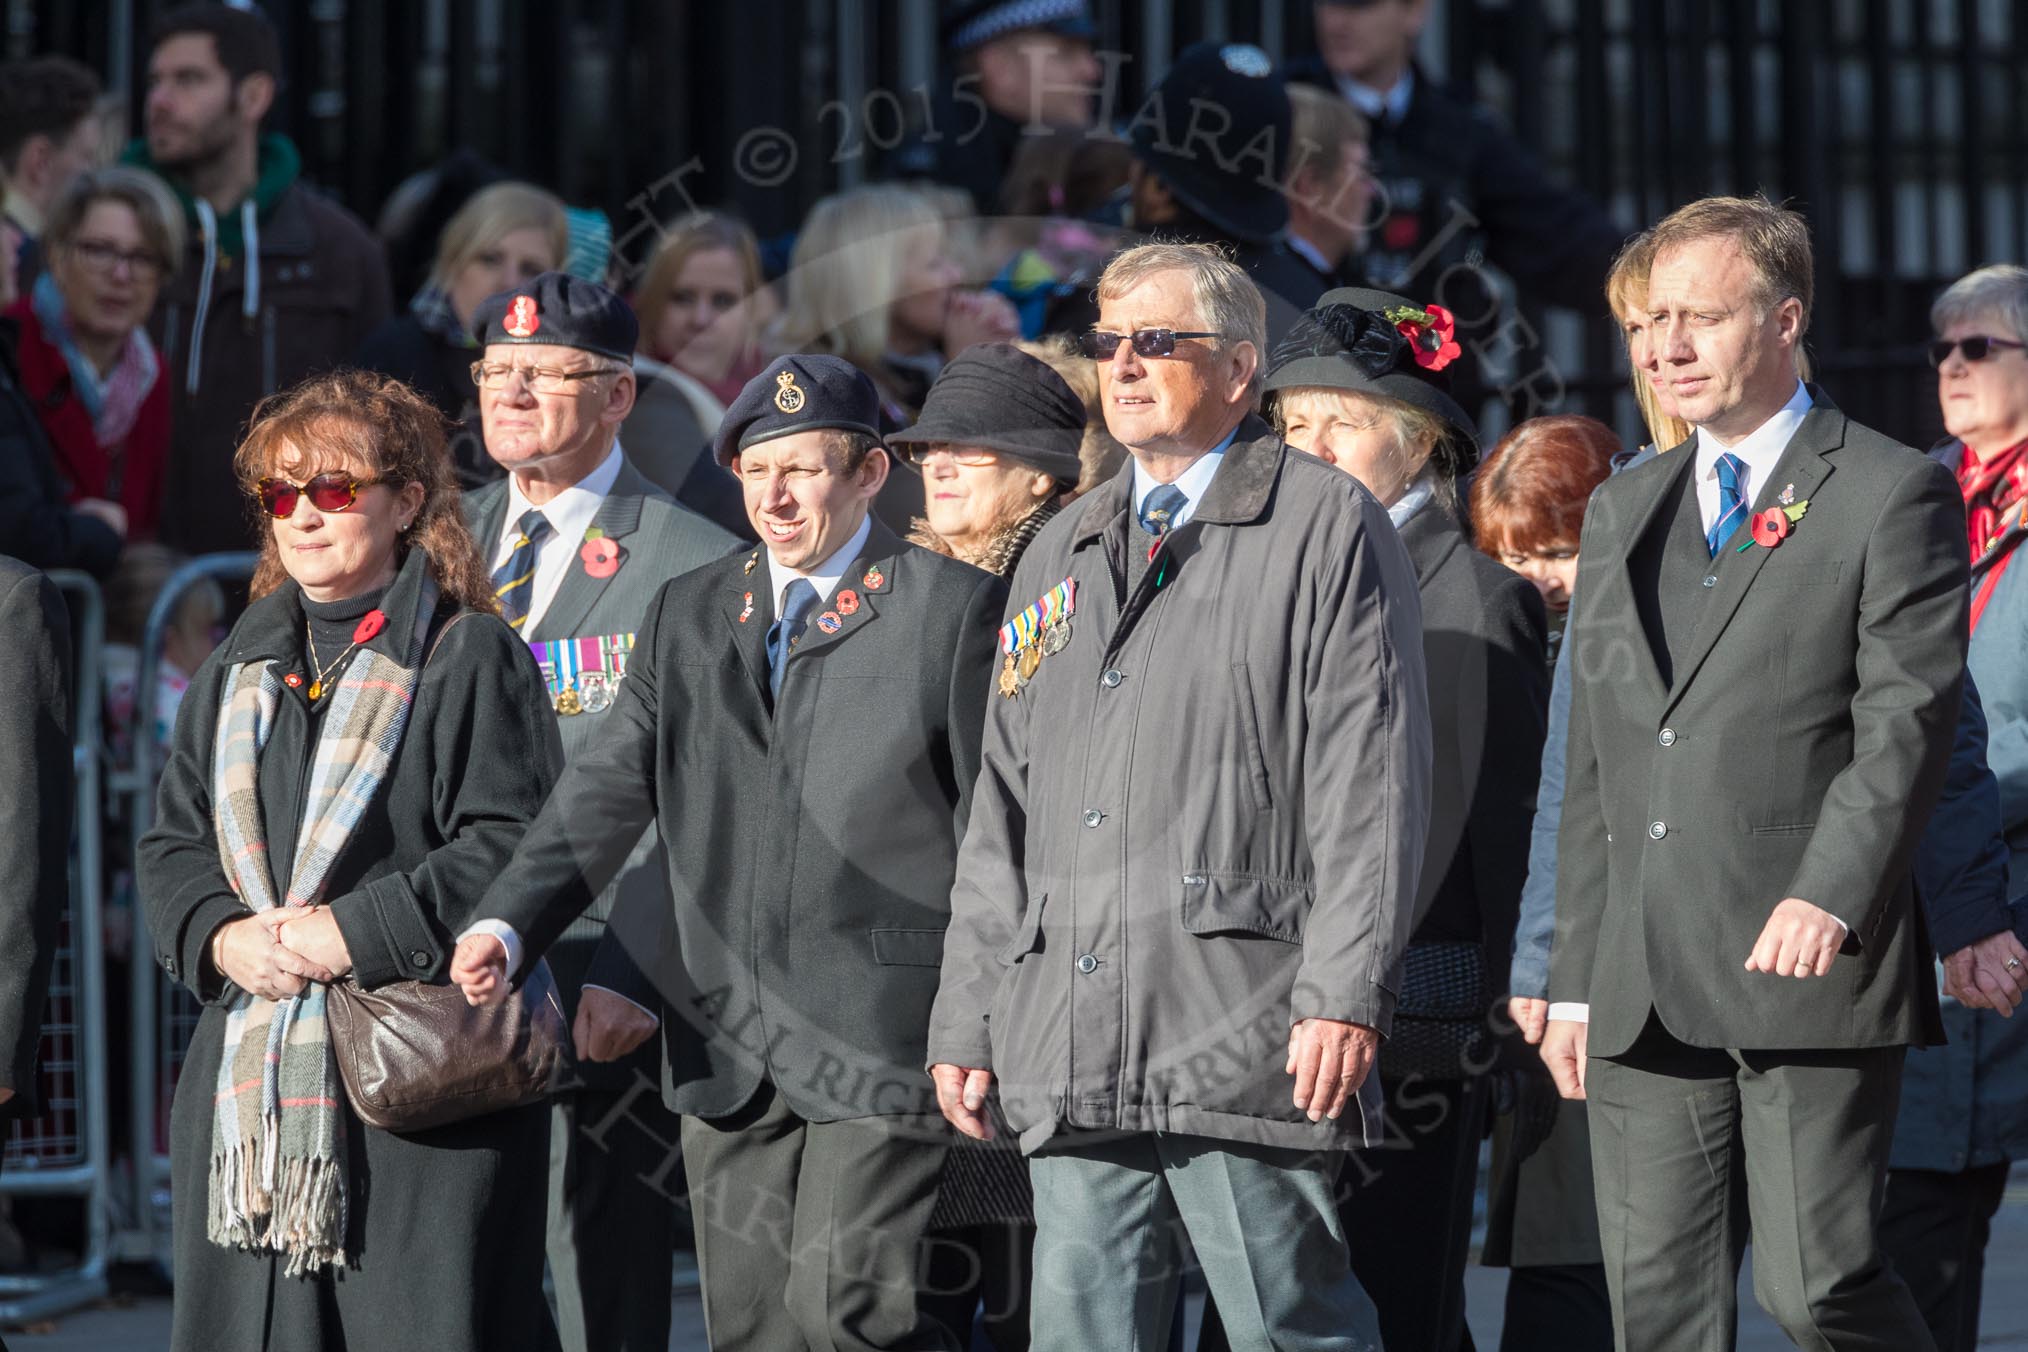 March Past, Remembrance Sunday at the Cenotaph 2016: M22 The Royal British Legion - Civilians.
Cenotaph, Whitehall, London SW1,
London,
Greater London,
United Kingdom,
on 13 November 2016 at 13:16, image #2665